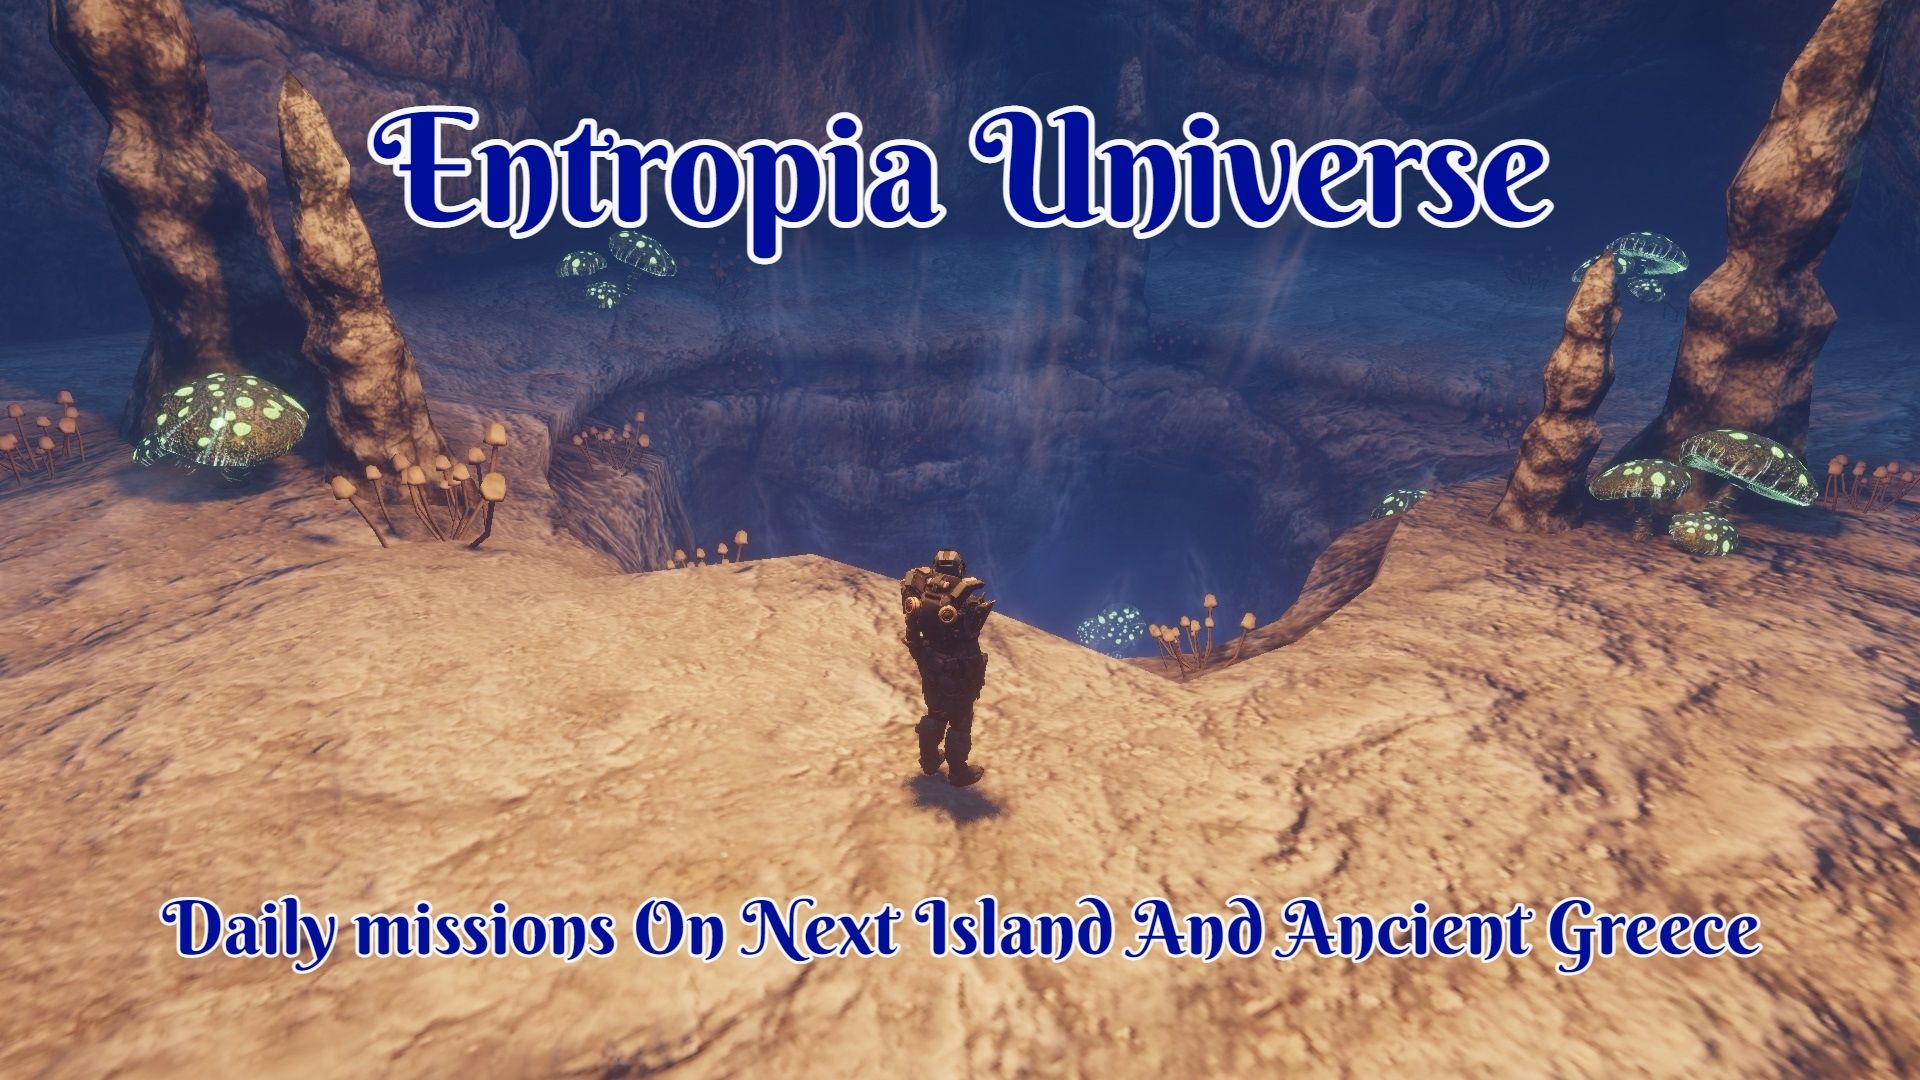 Daily Missions Next Island And Ancient Greece.jpg